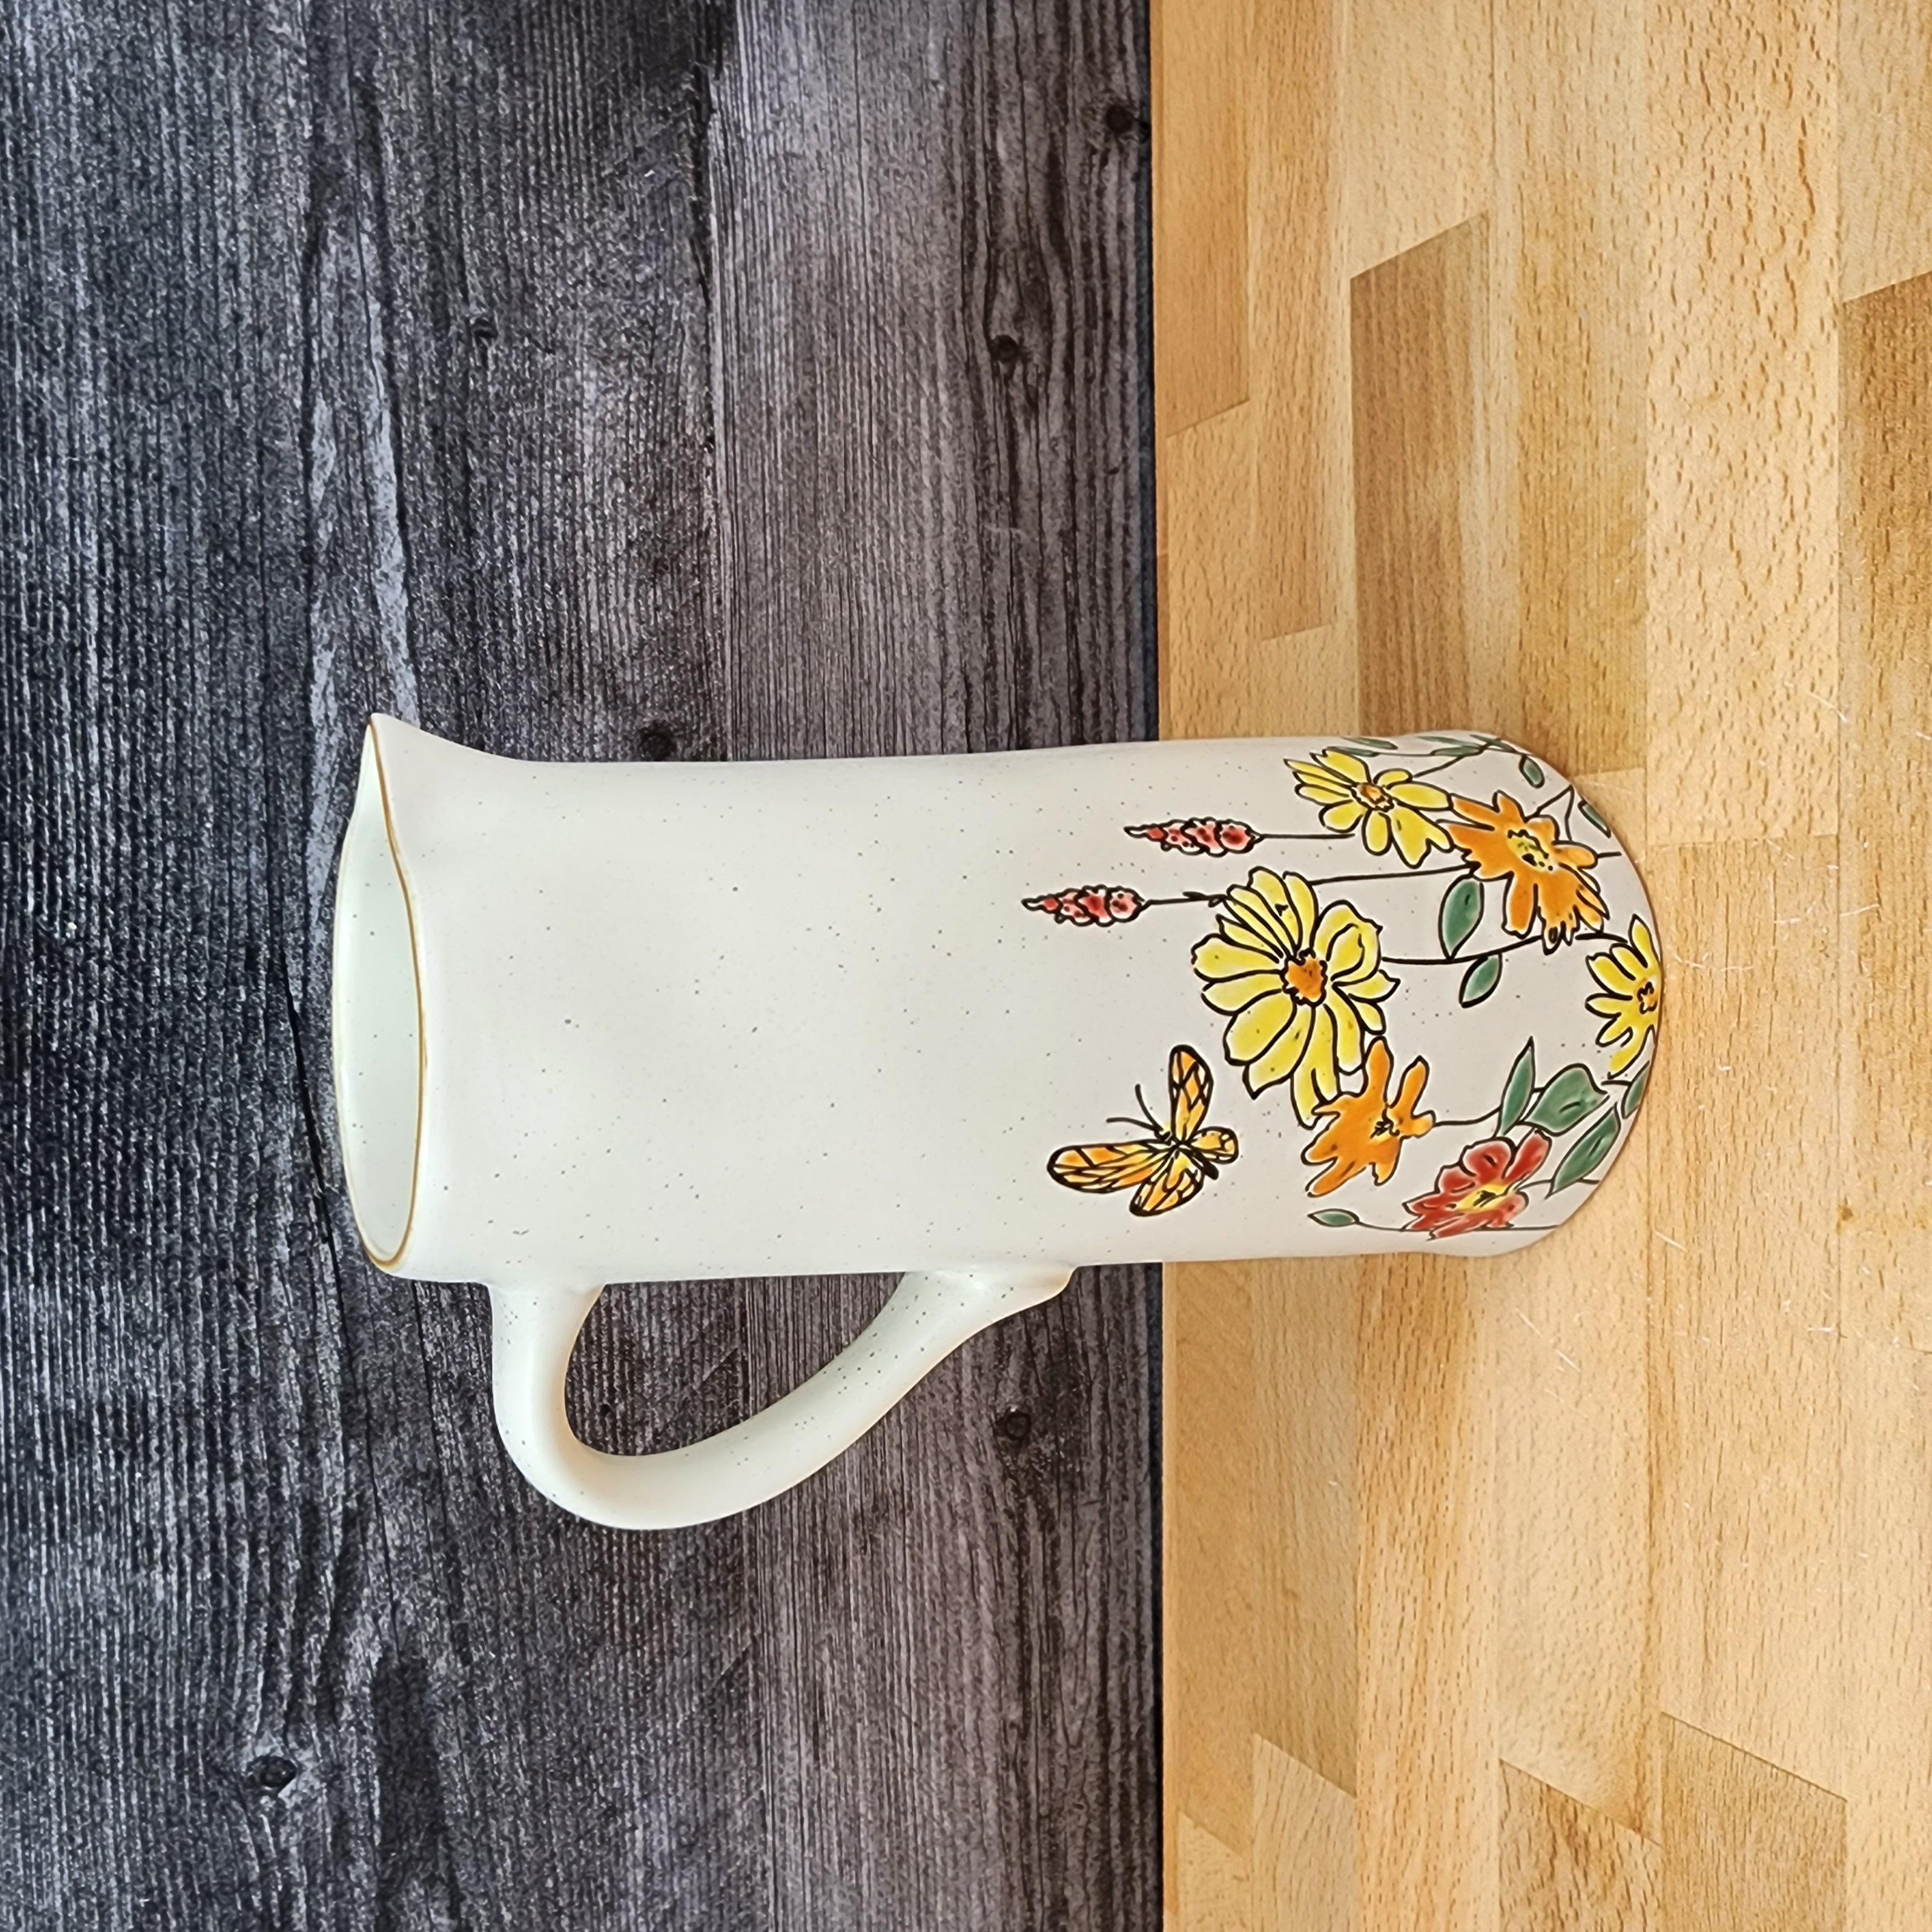 This Summer Butterflies and Daisy Embossed Pitcher Decorative Floral Home by Blue Sky is made with love by Premier Homegoods! Shop more unique gift ideas today with Spots Initiatives, the best way to support creators.